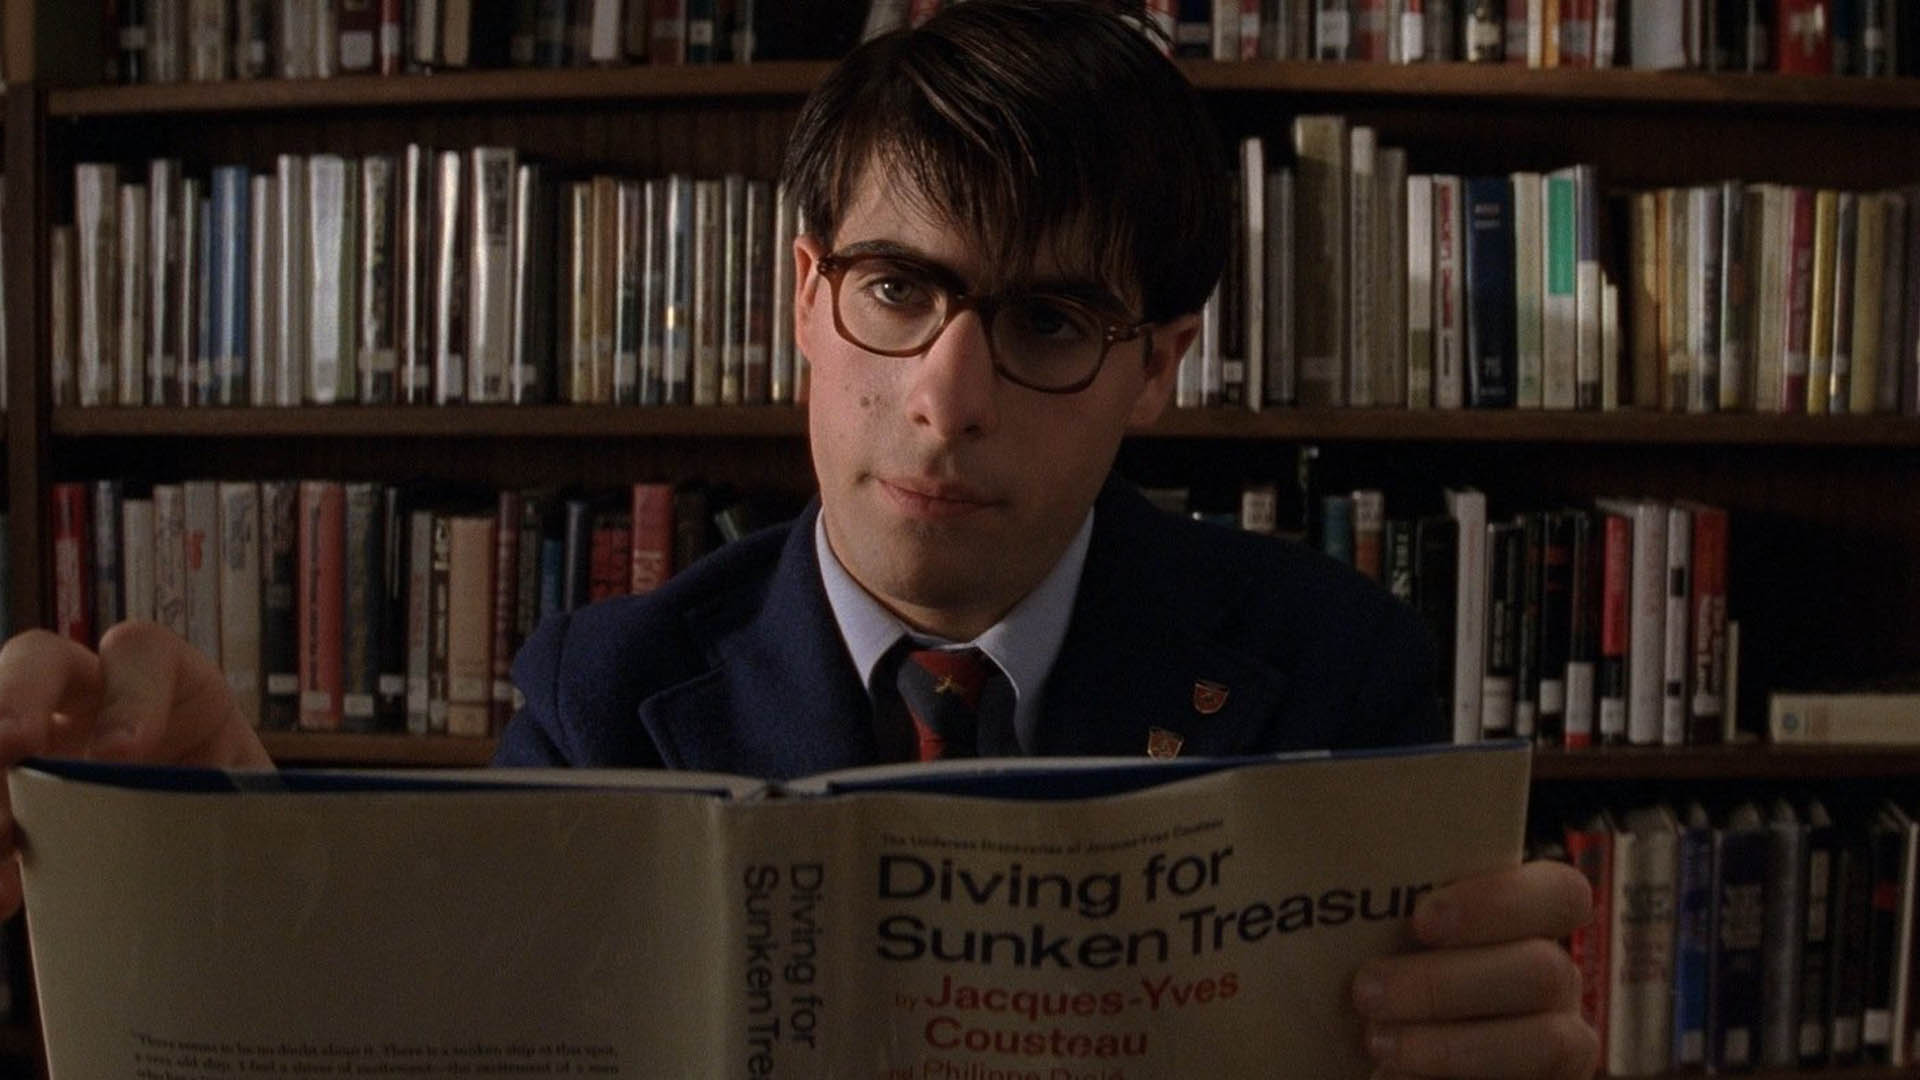 The main character of Rushmore is Bill Marie